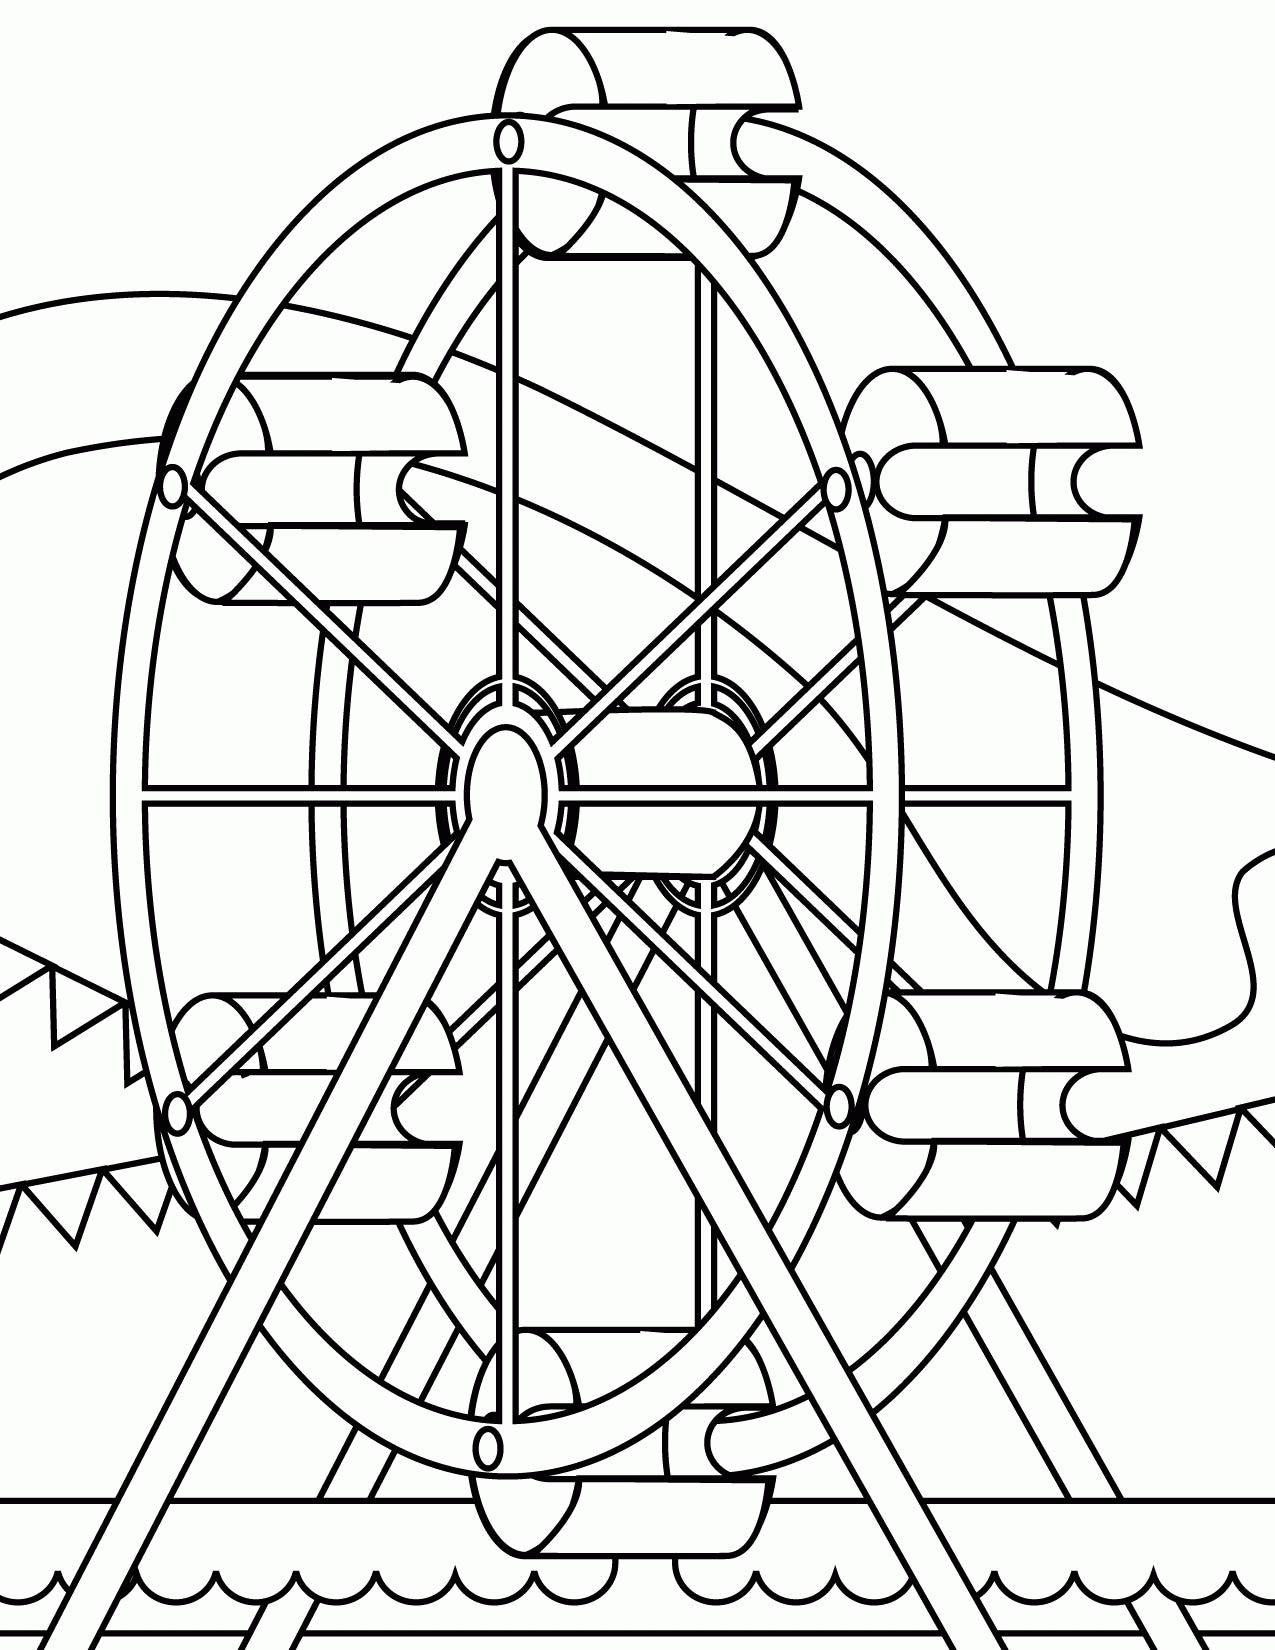 Drawing Ferris Wheel  How to Draw a Ferries Wheel for Baby  Colouring  and Drawing Pages Easy step  YouTube